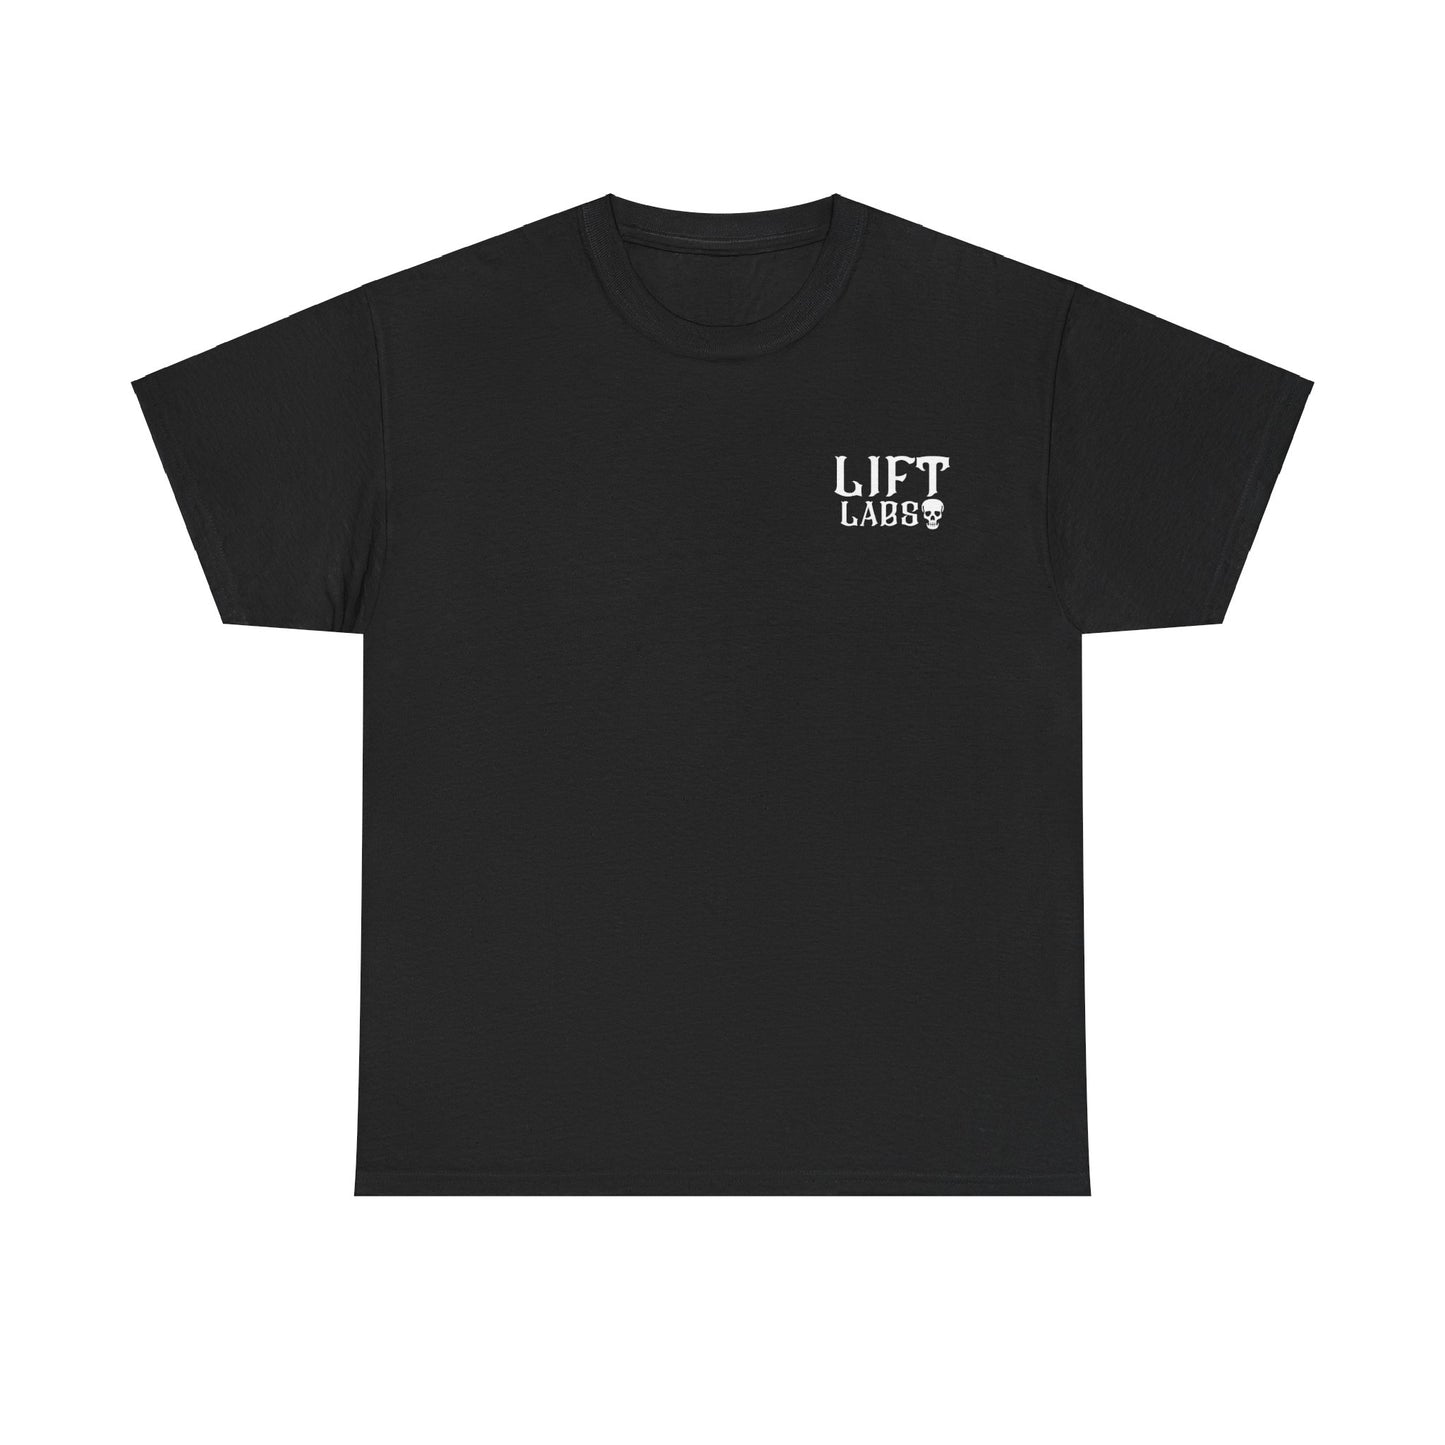 Lift Labs Built to Conquer Skull Gym Cotton Tee